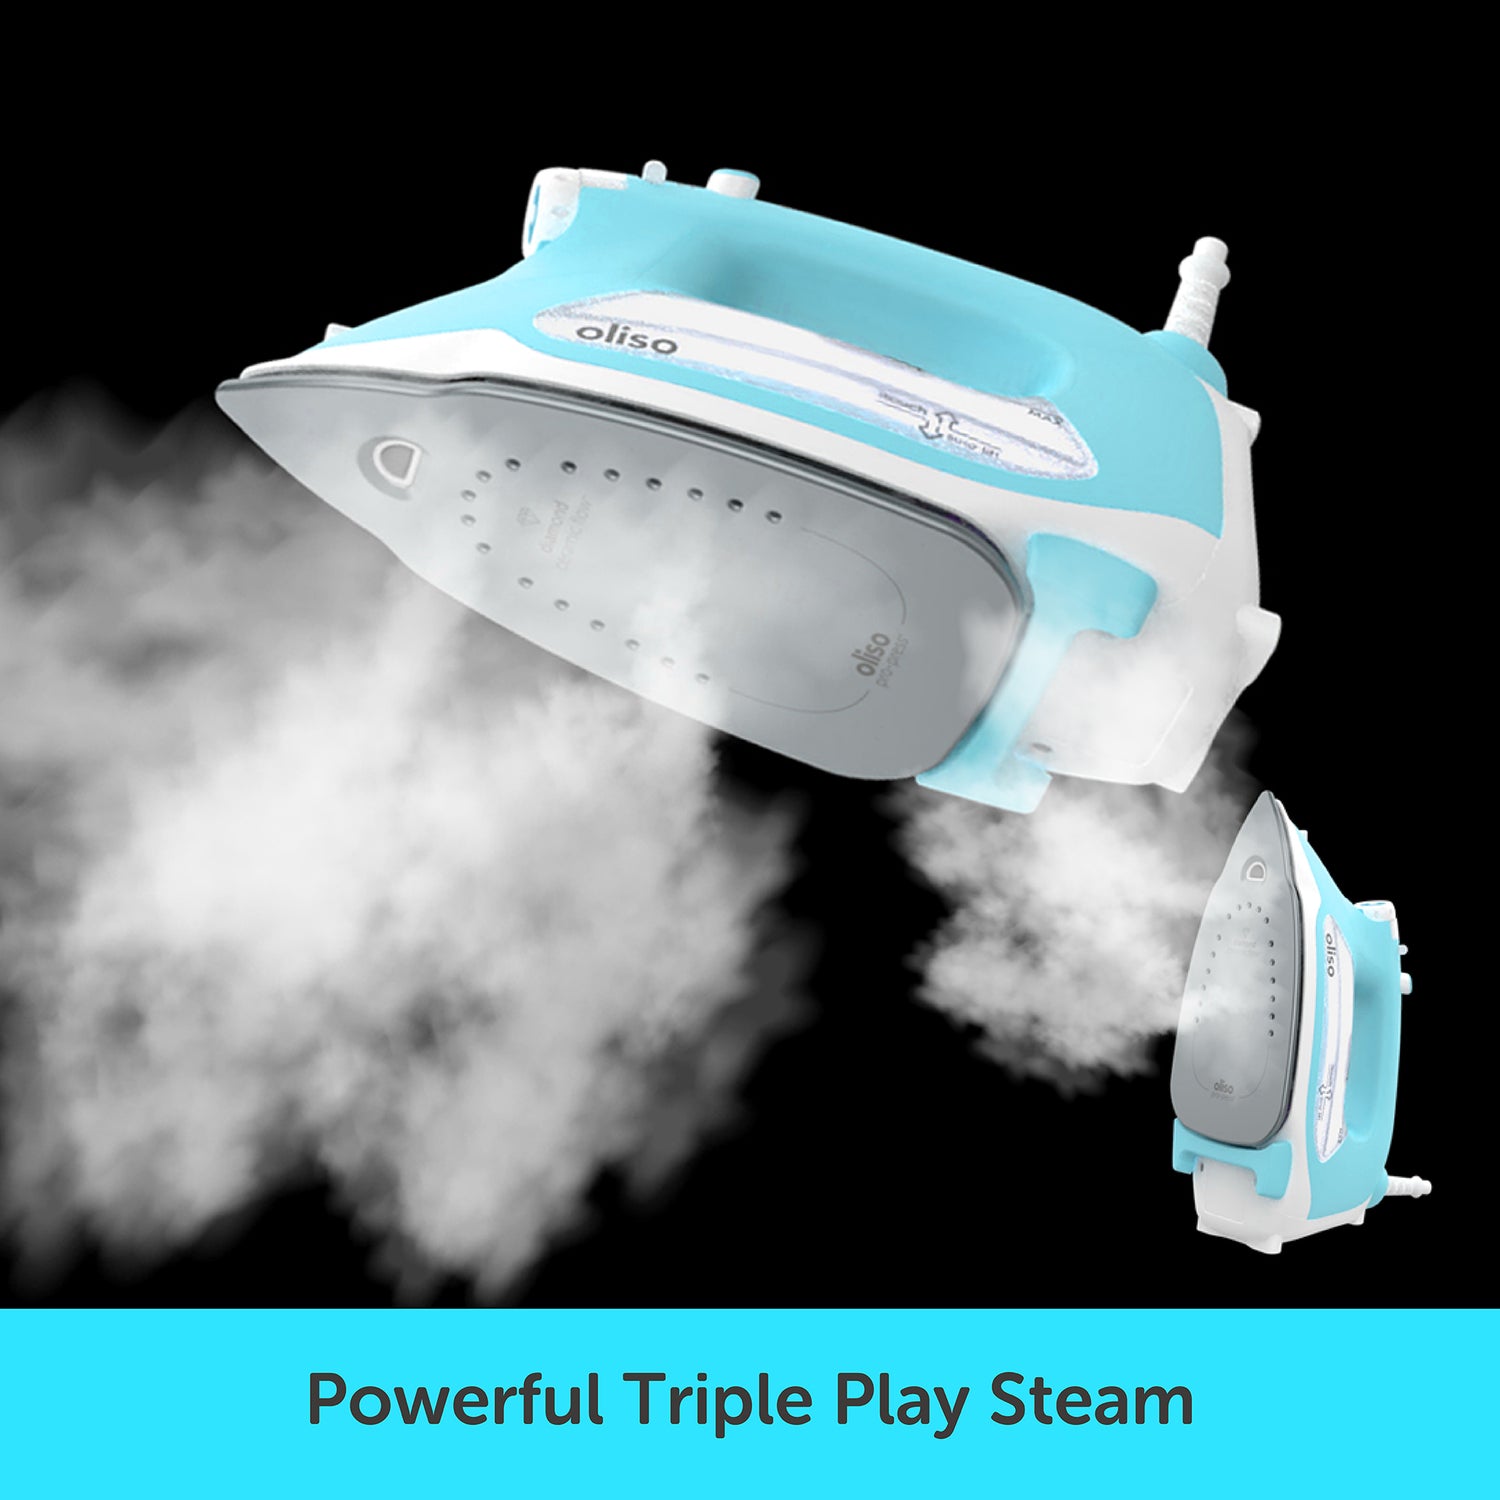 The ProPlus iron lift showing it powerful burst of steam, that can also be used vertically. With a icon calling out the ProPlus zero-drip system.